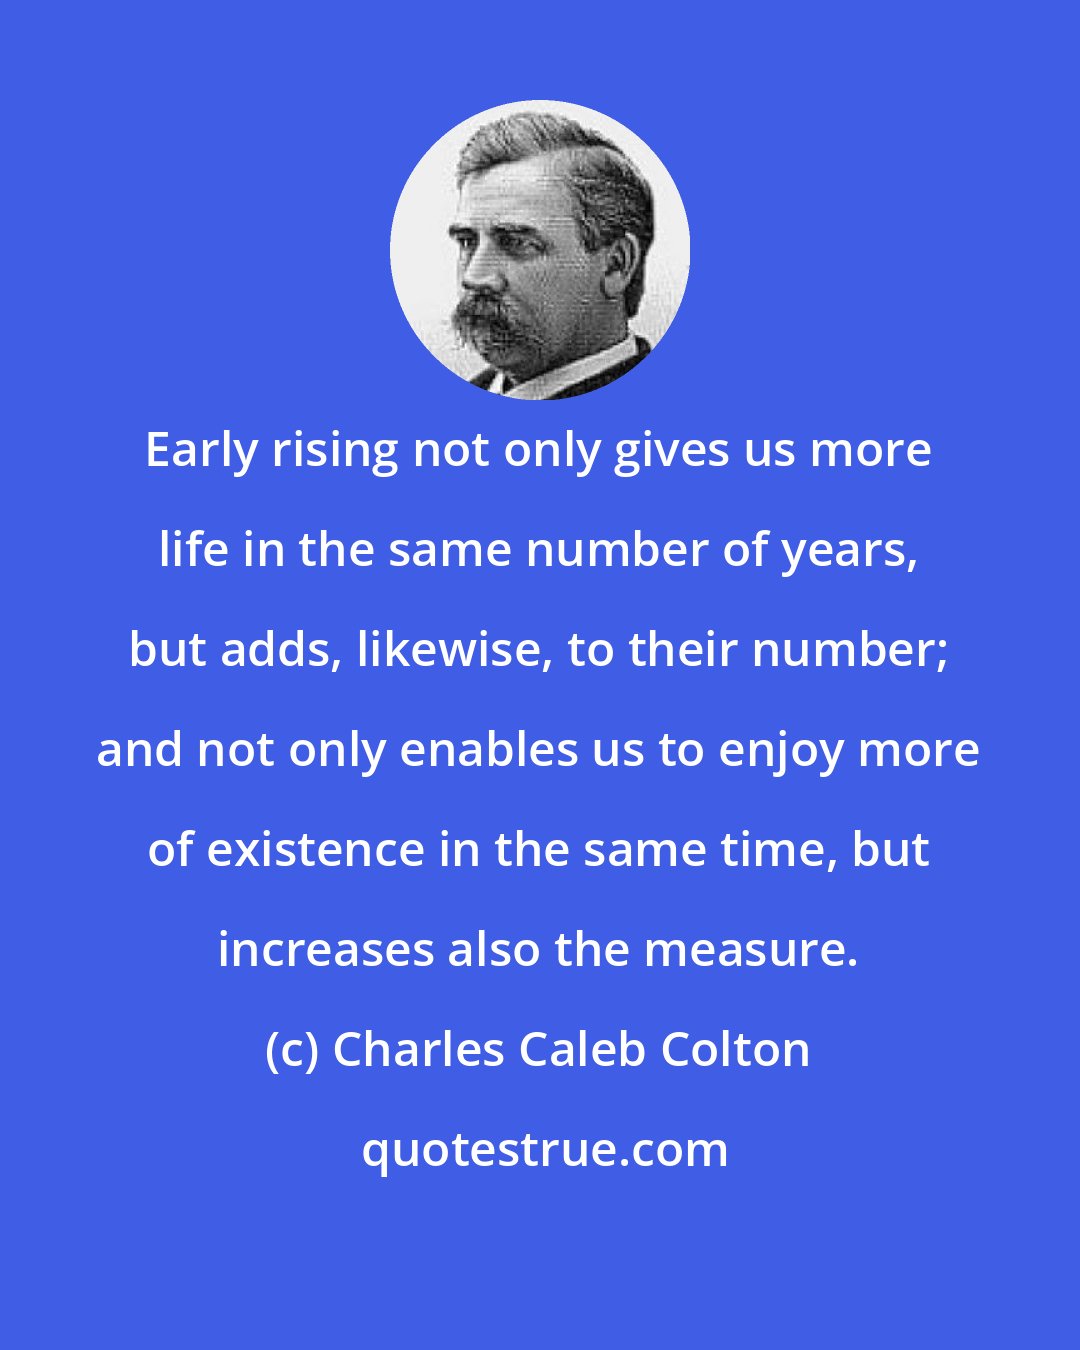 Charles Caleb Colton: Early rising not only gives us more life in the same number of years, but adds, likewise, to their number; and not only enables us to enjoy more of existence in the same time, but increases also the measure.